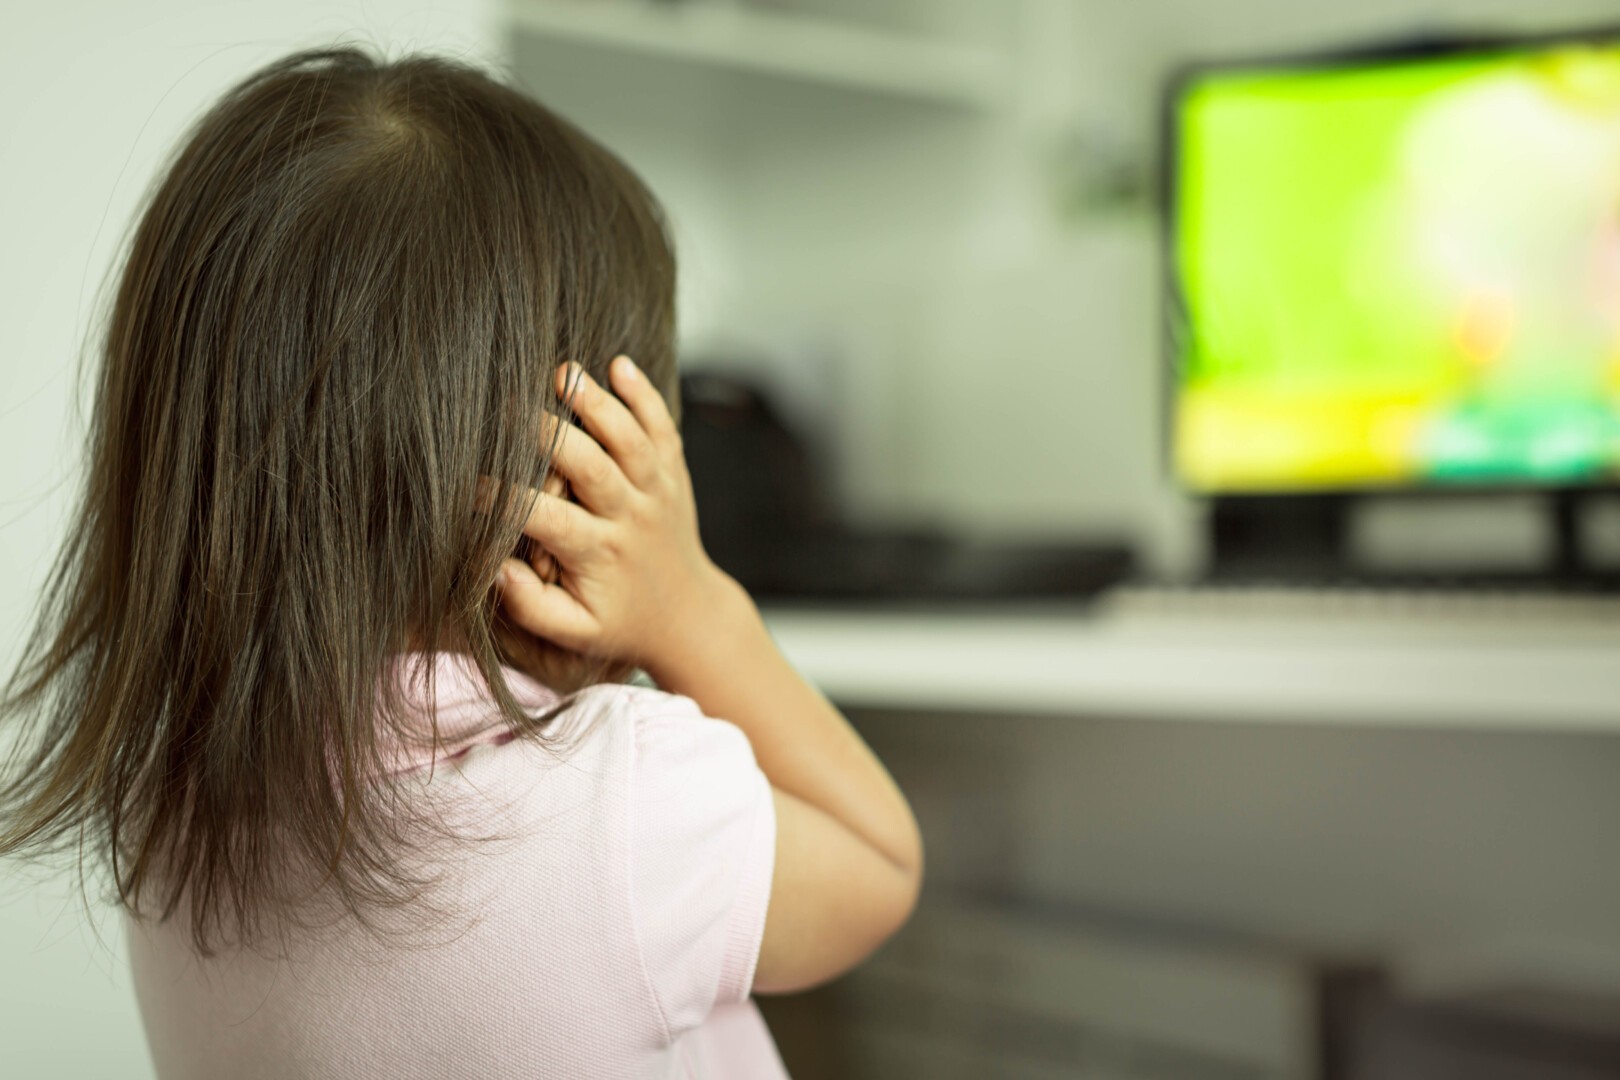 A young girl with sensory processing disorder facing away from the camera covers her ears with her hands. A television is on in the background of the image.